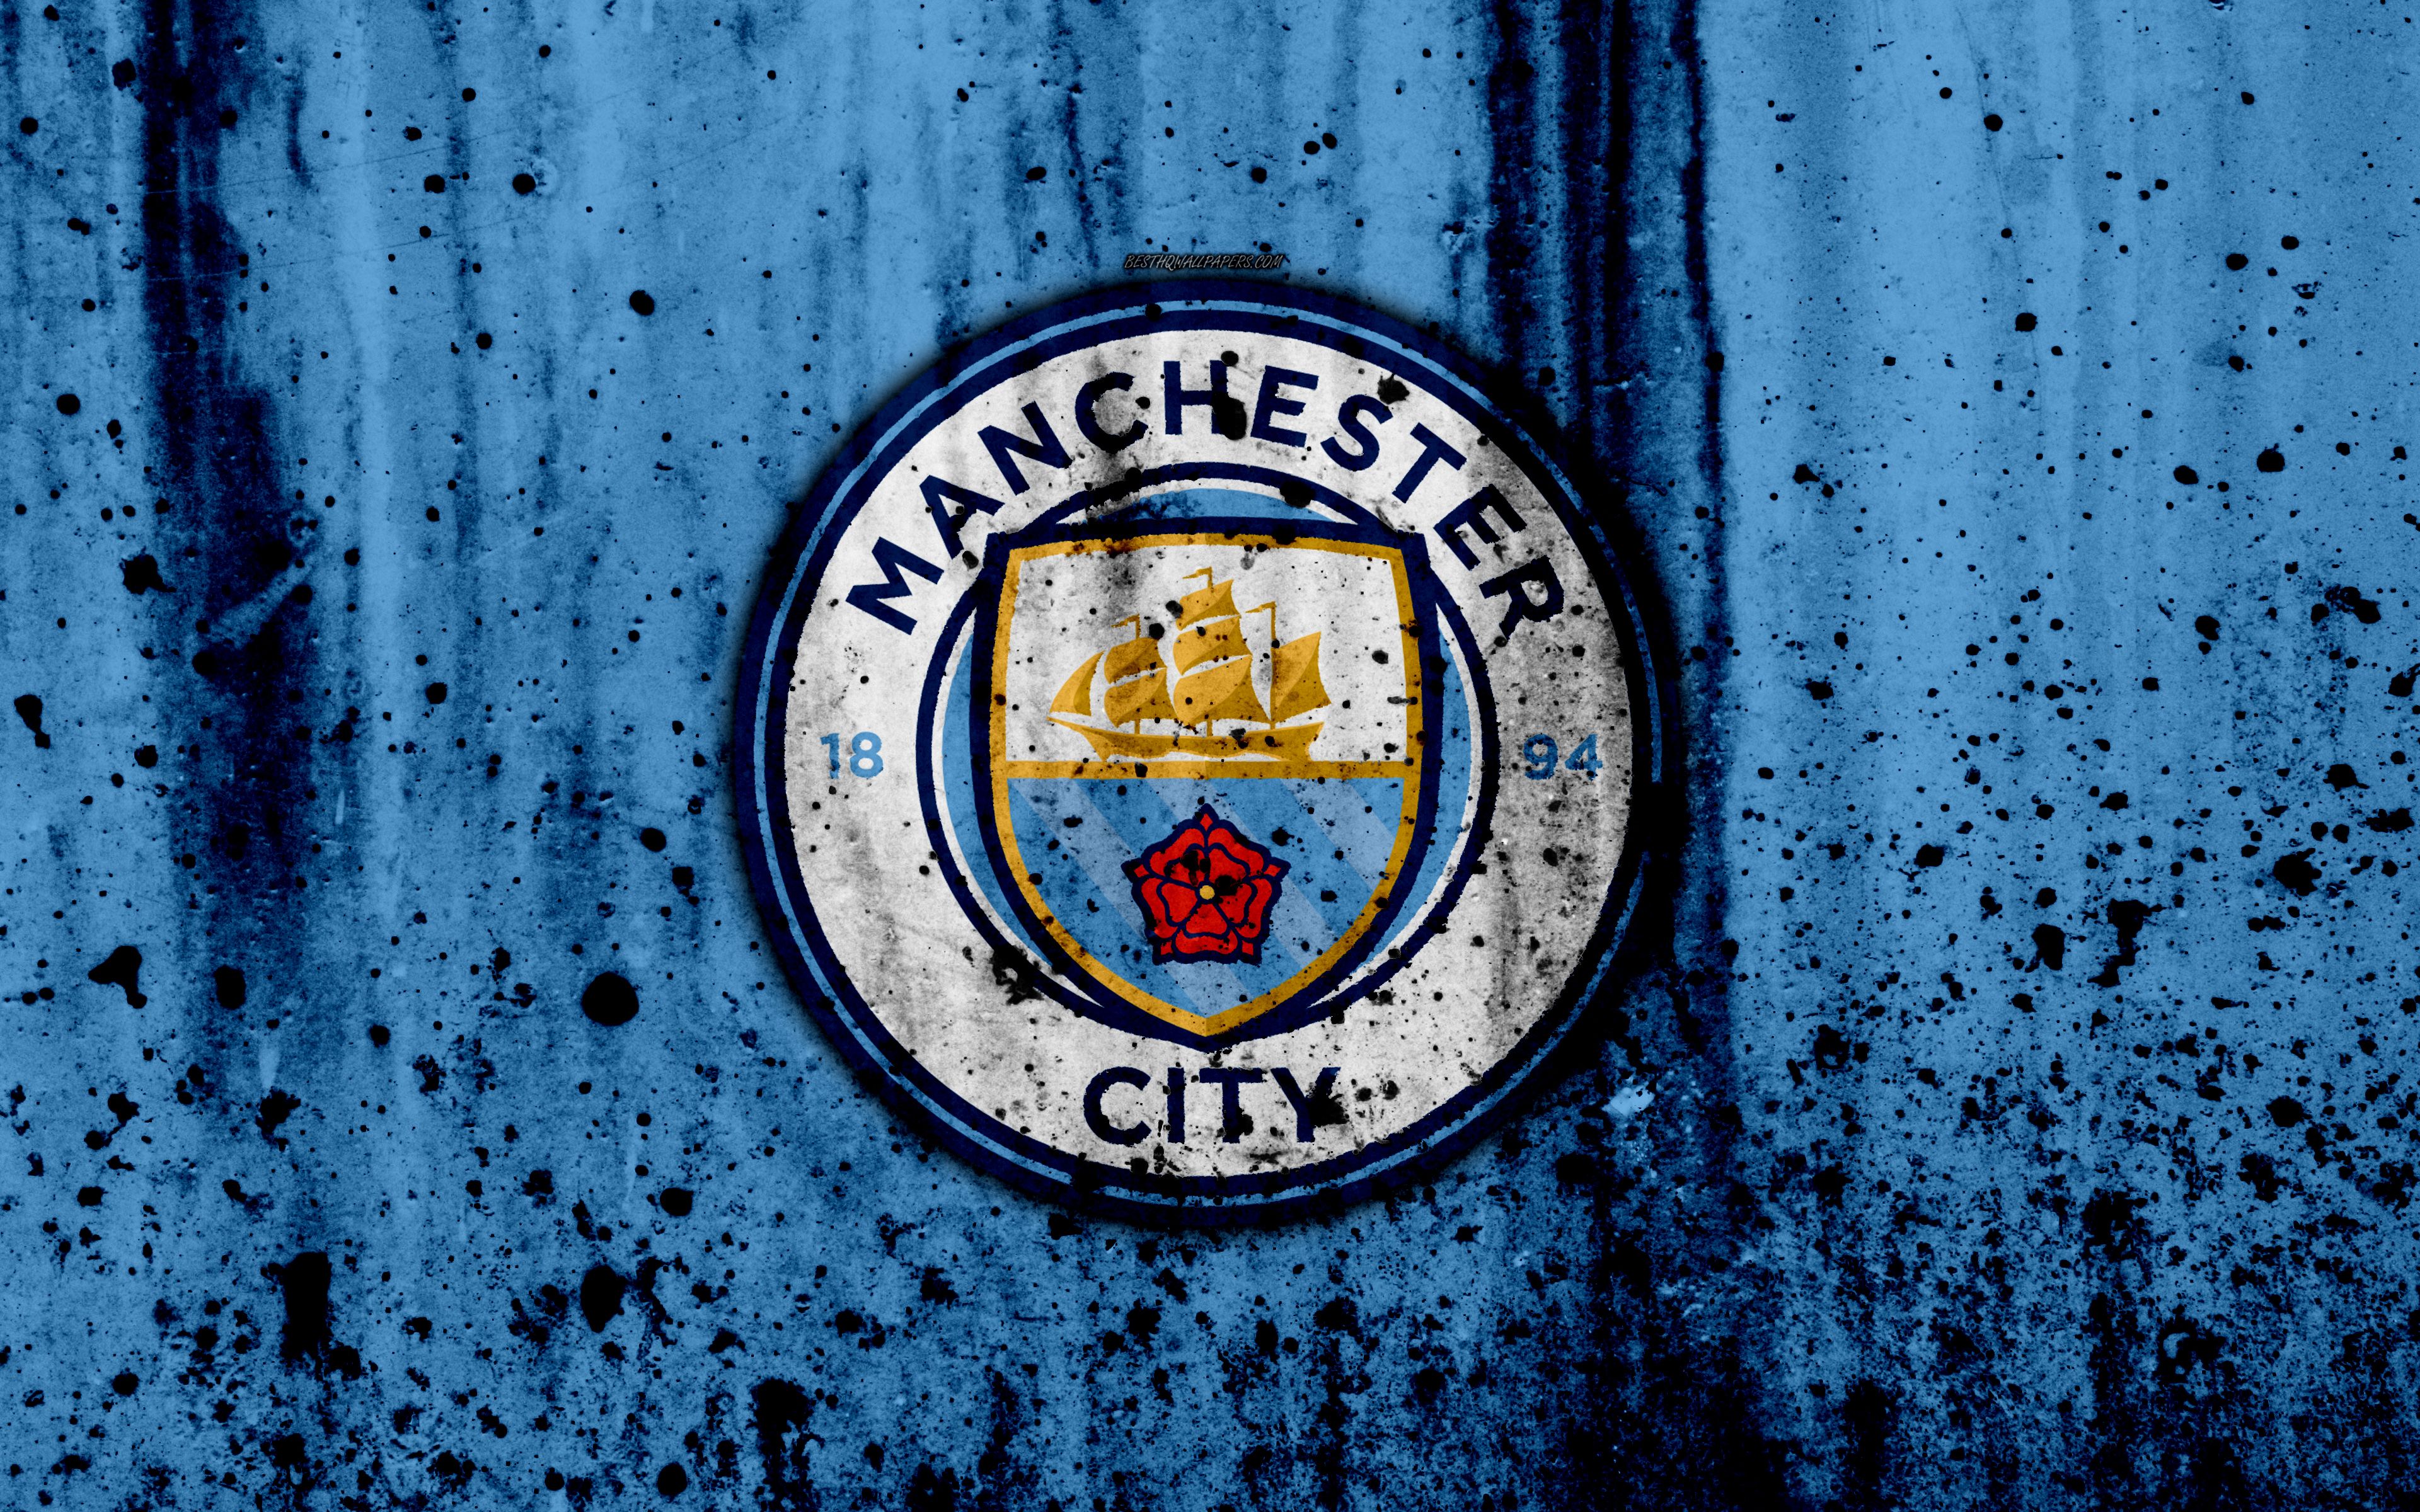 4k PC Manchester City Wallpapers Wallpaper Cave